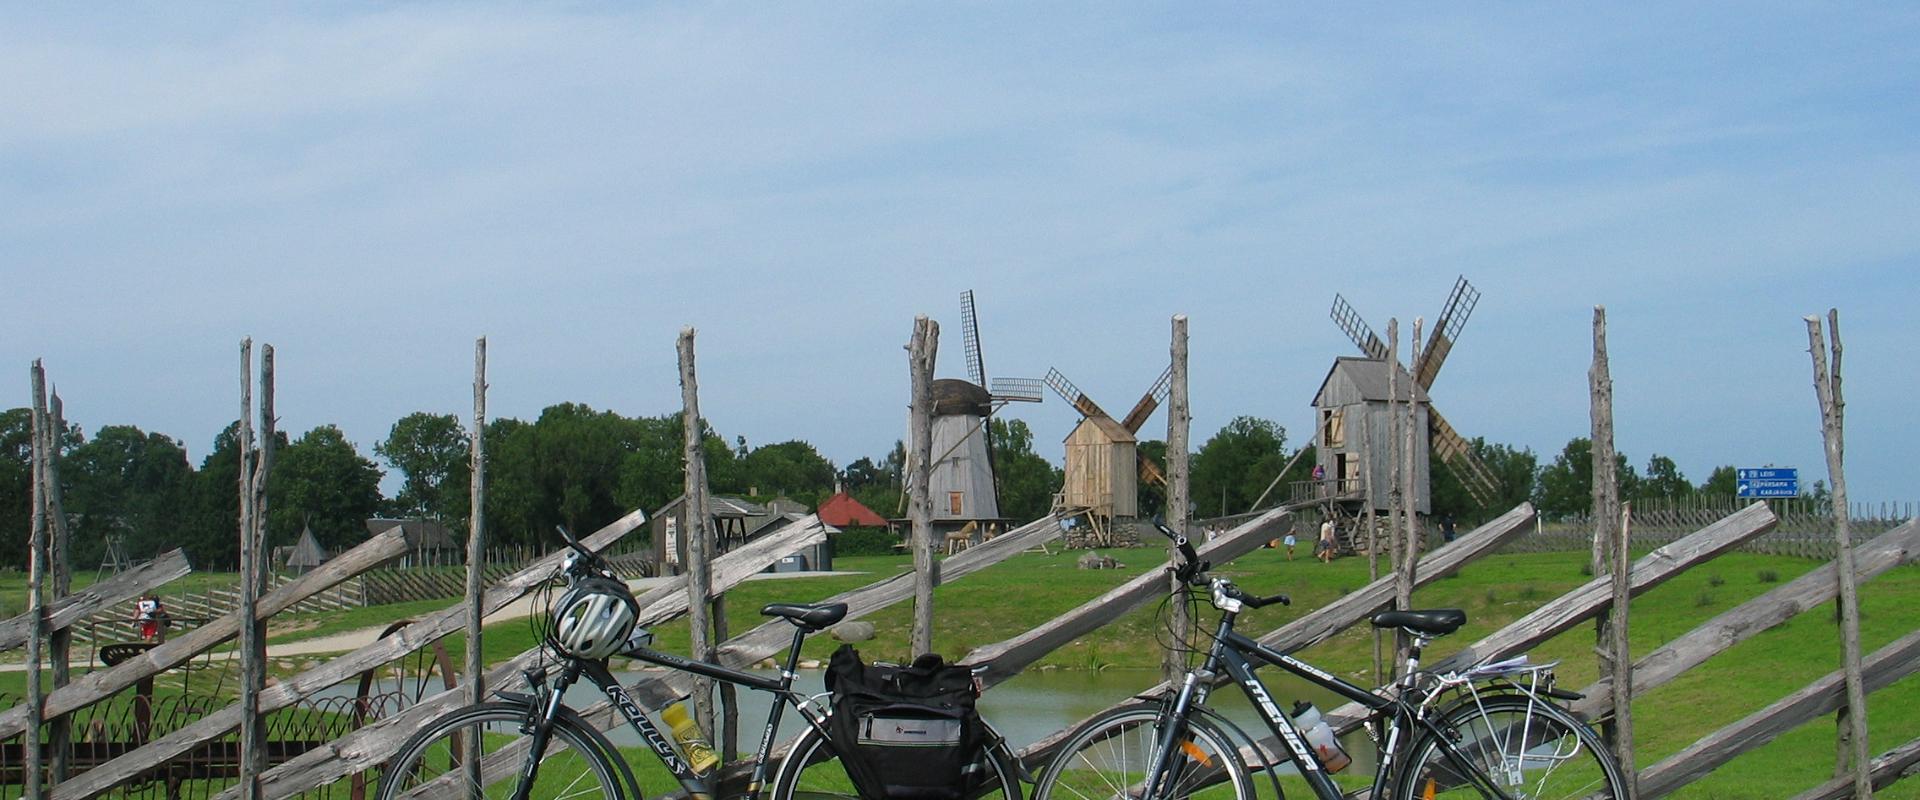 Self-guided bicycle tour Western Estonia and Islands